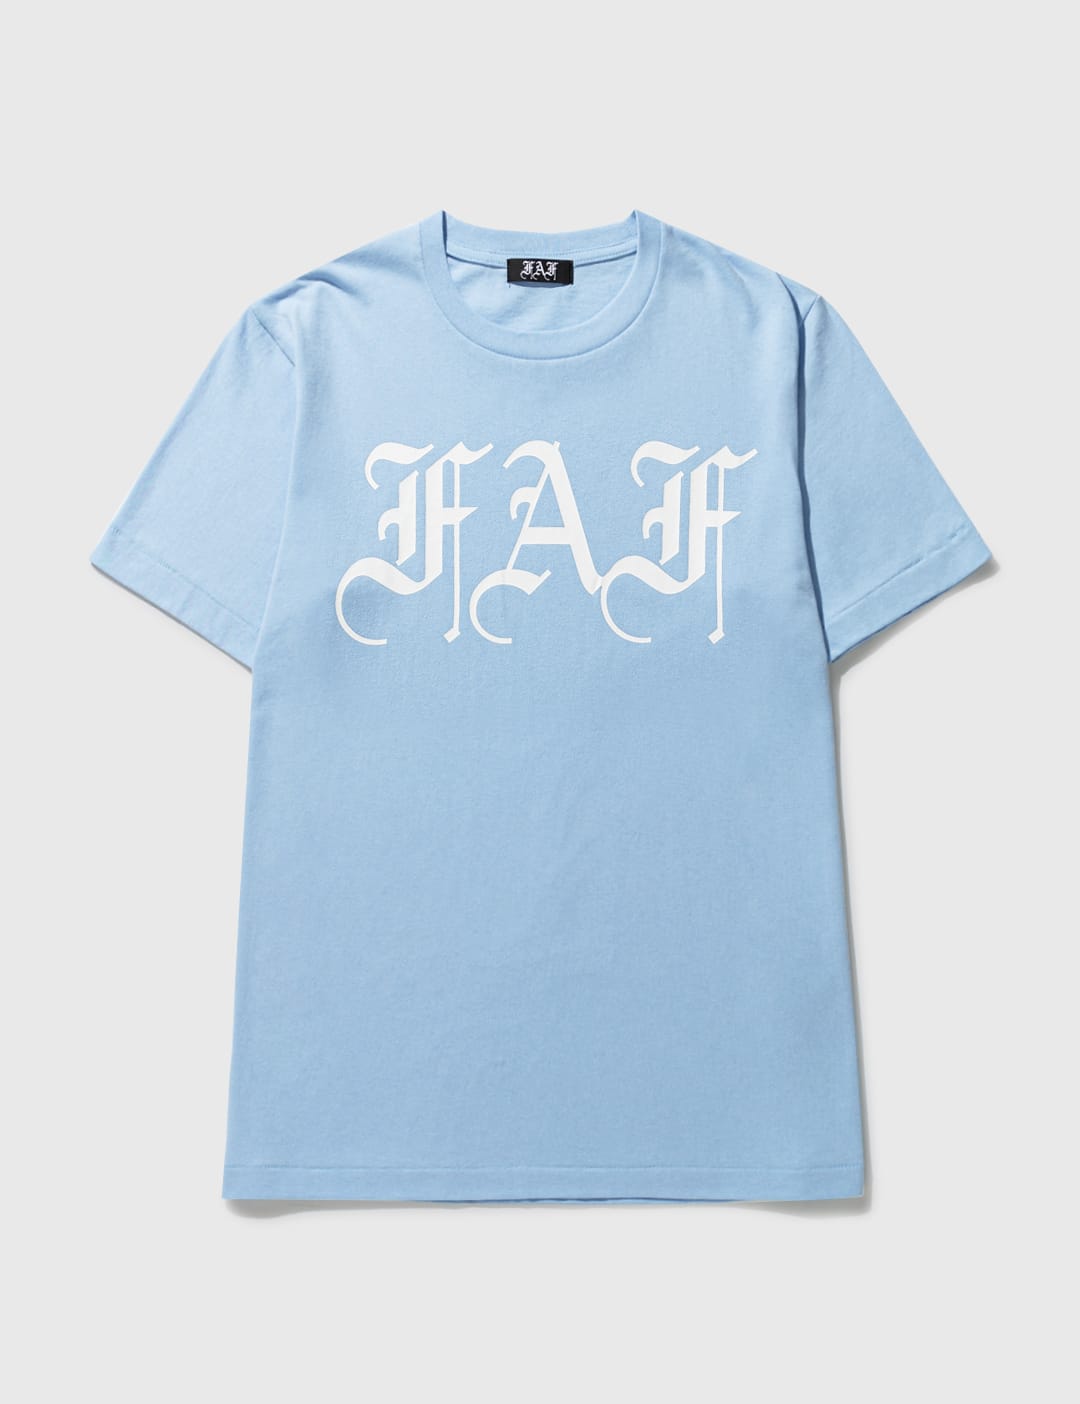 Stüssy - Soda T-shirt | HBX - Globally Curated Fashion and 